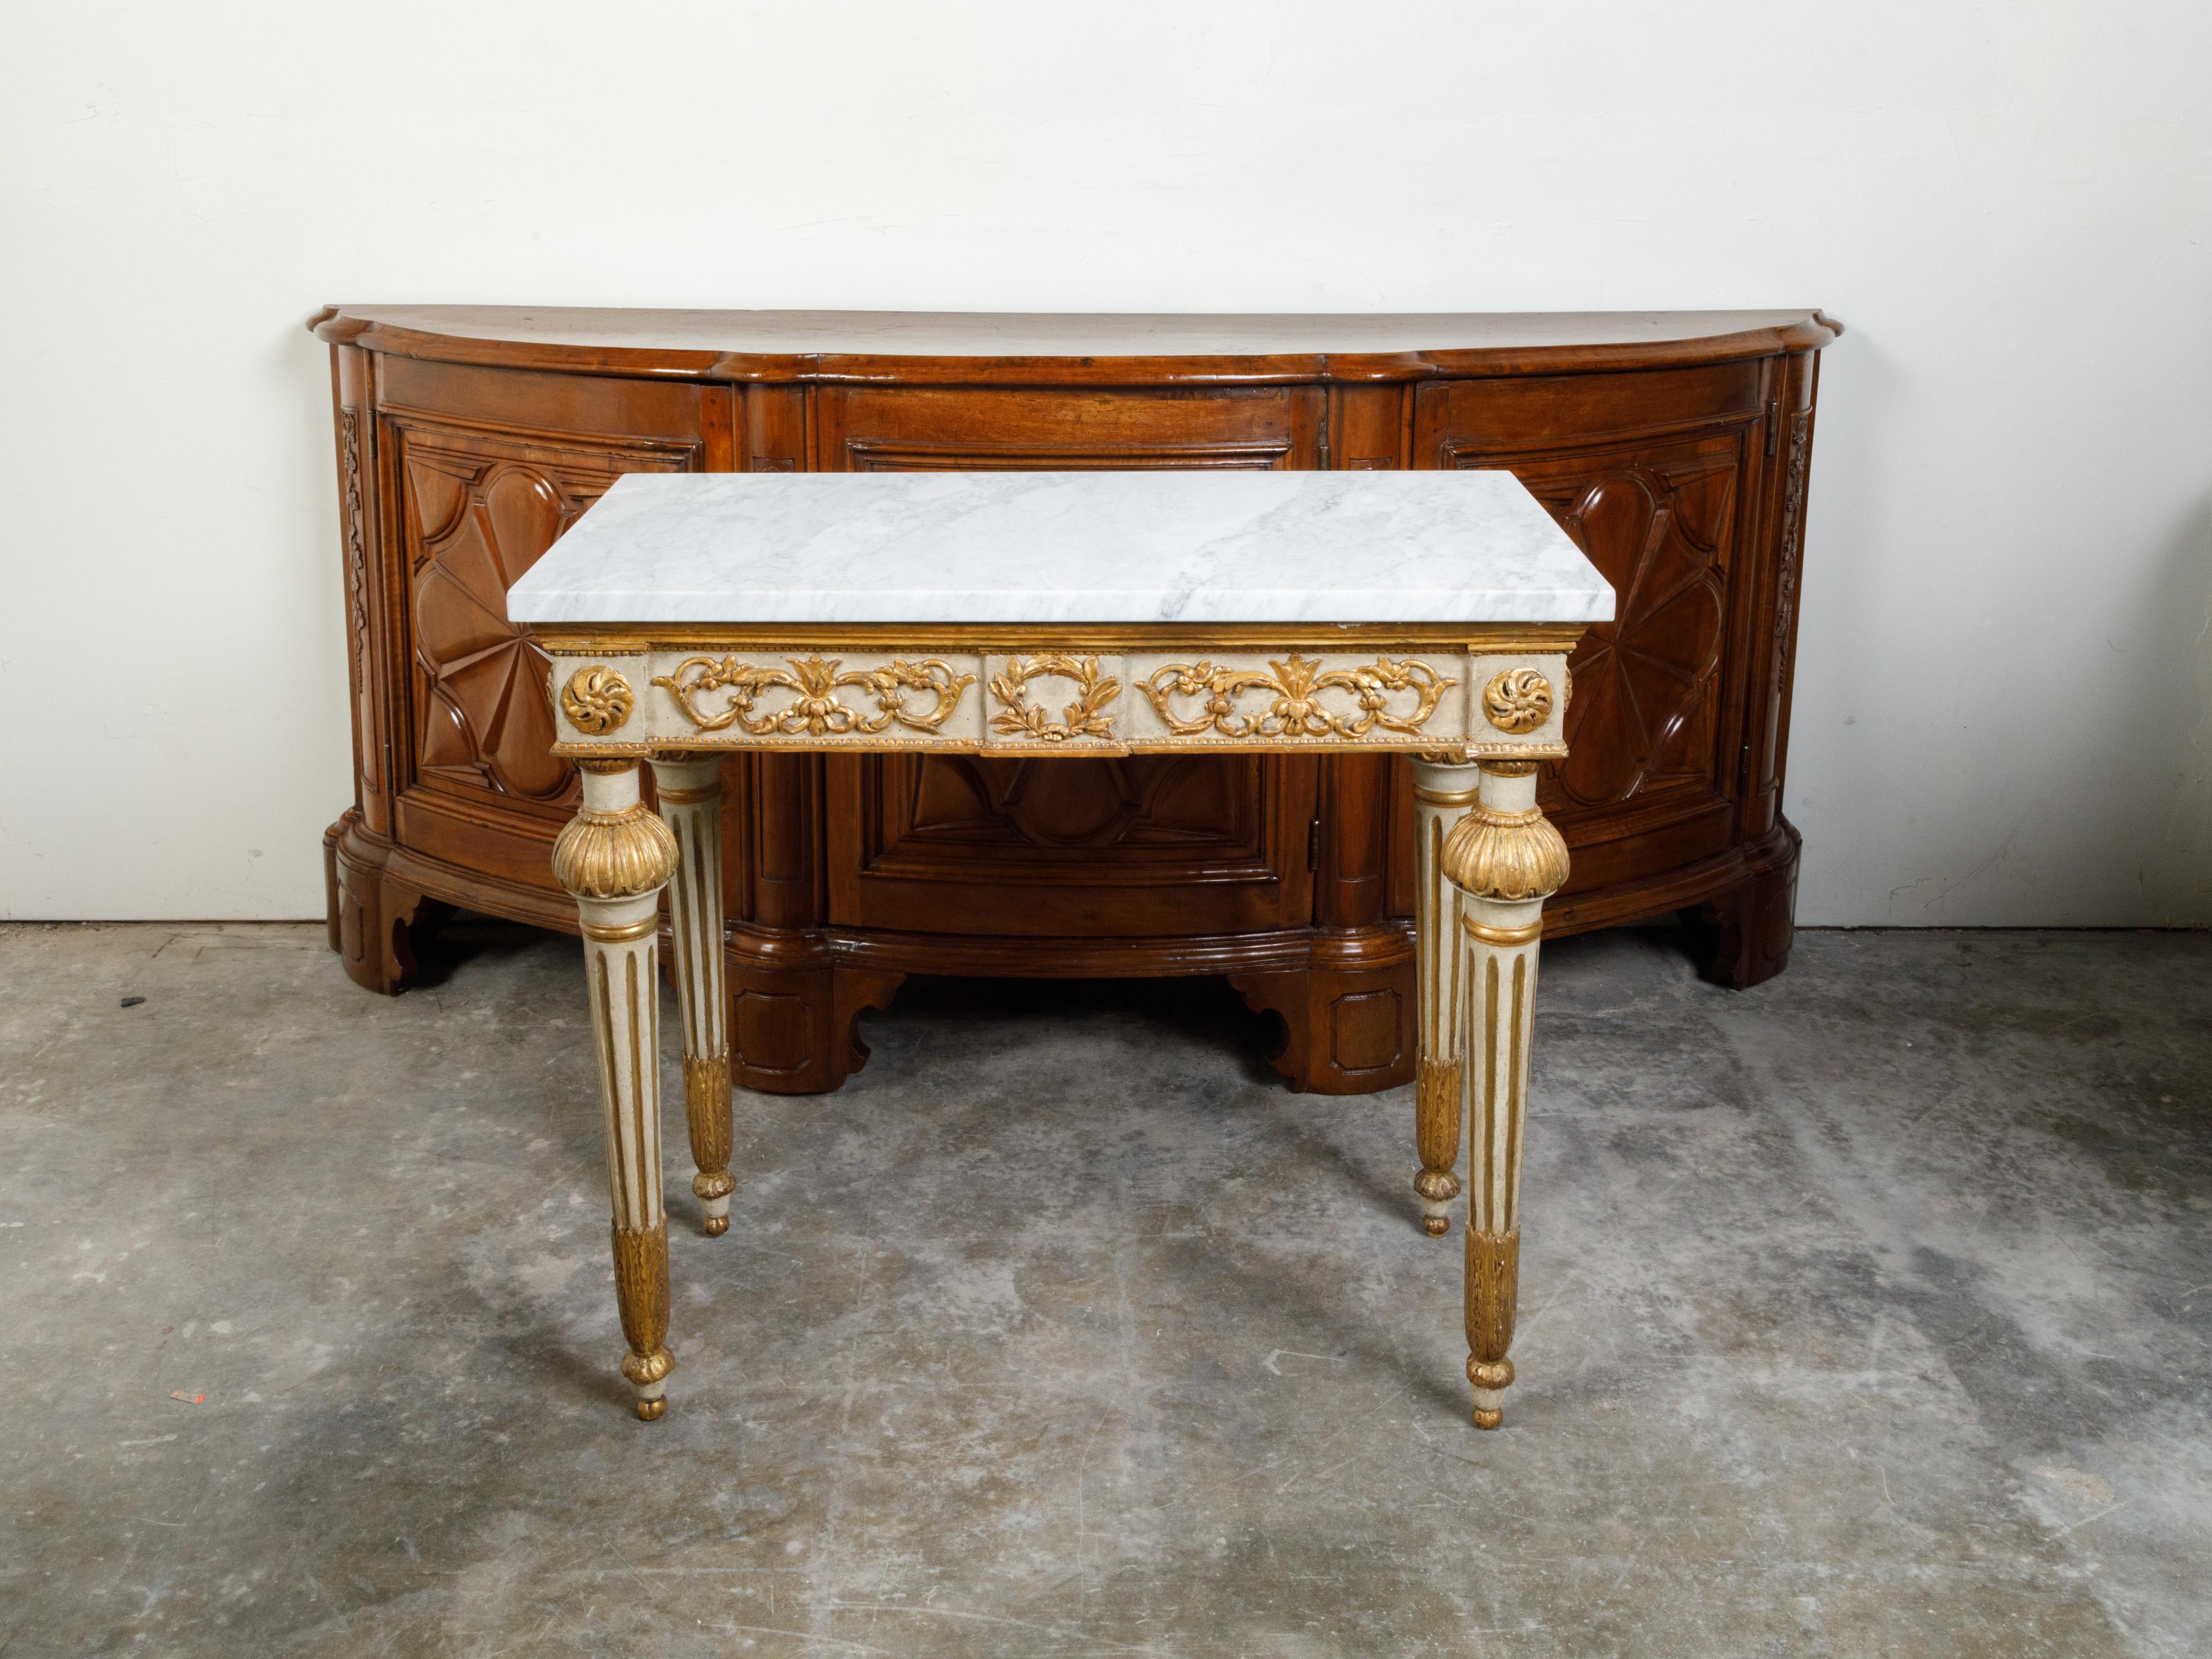 An Italian Neoclassical period painted and gilt console table from the 18th century, with white marble top and hand-carved décor. Created in Italy during the 18th century, this Neoclassical console table features a rectangular white marble top